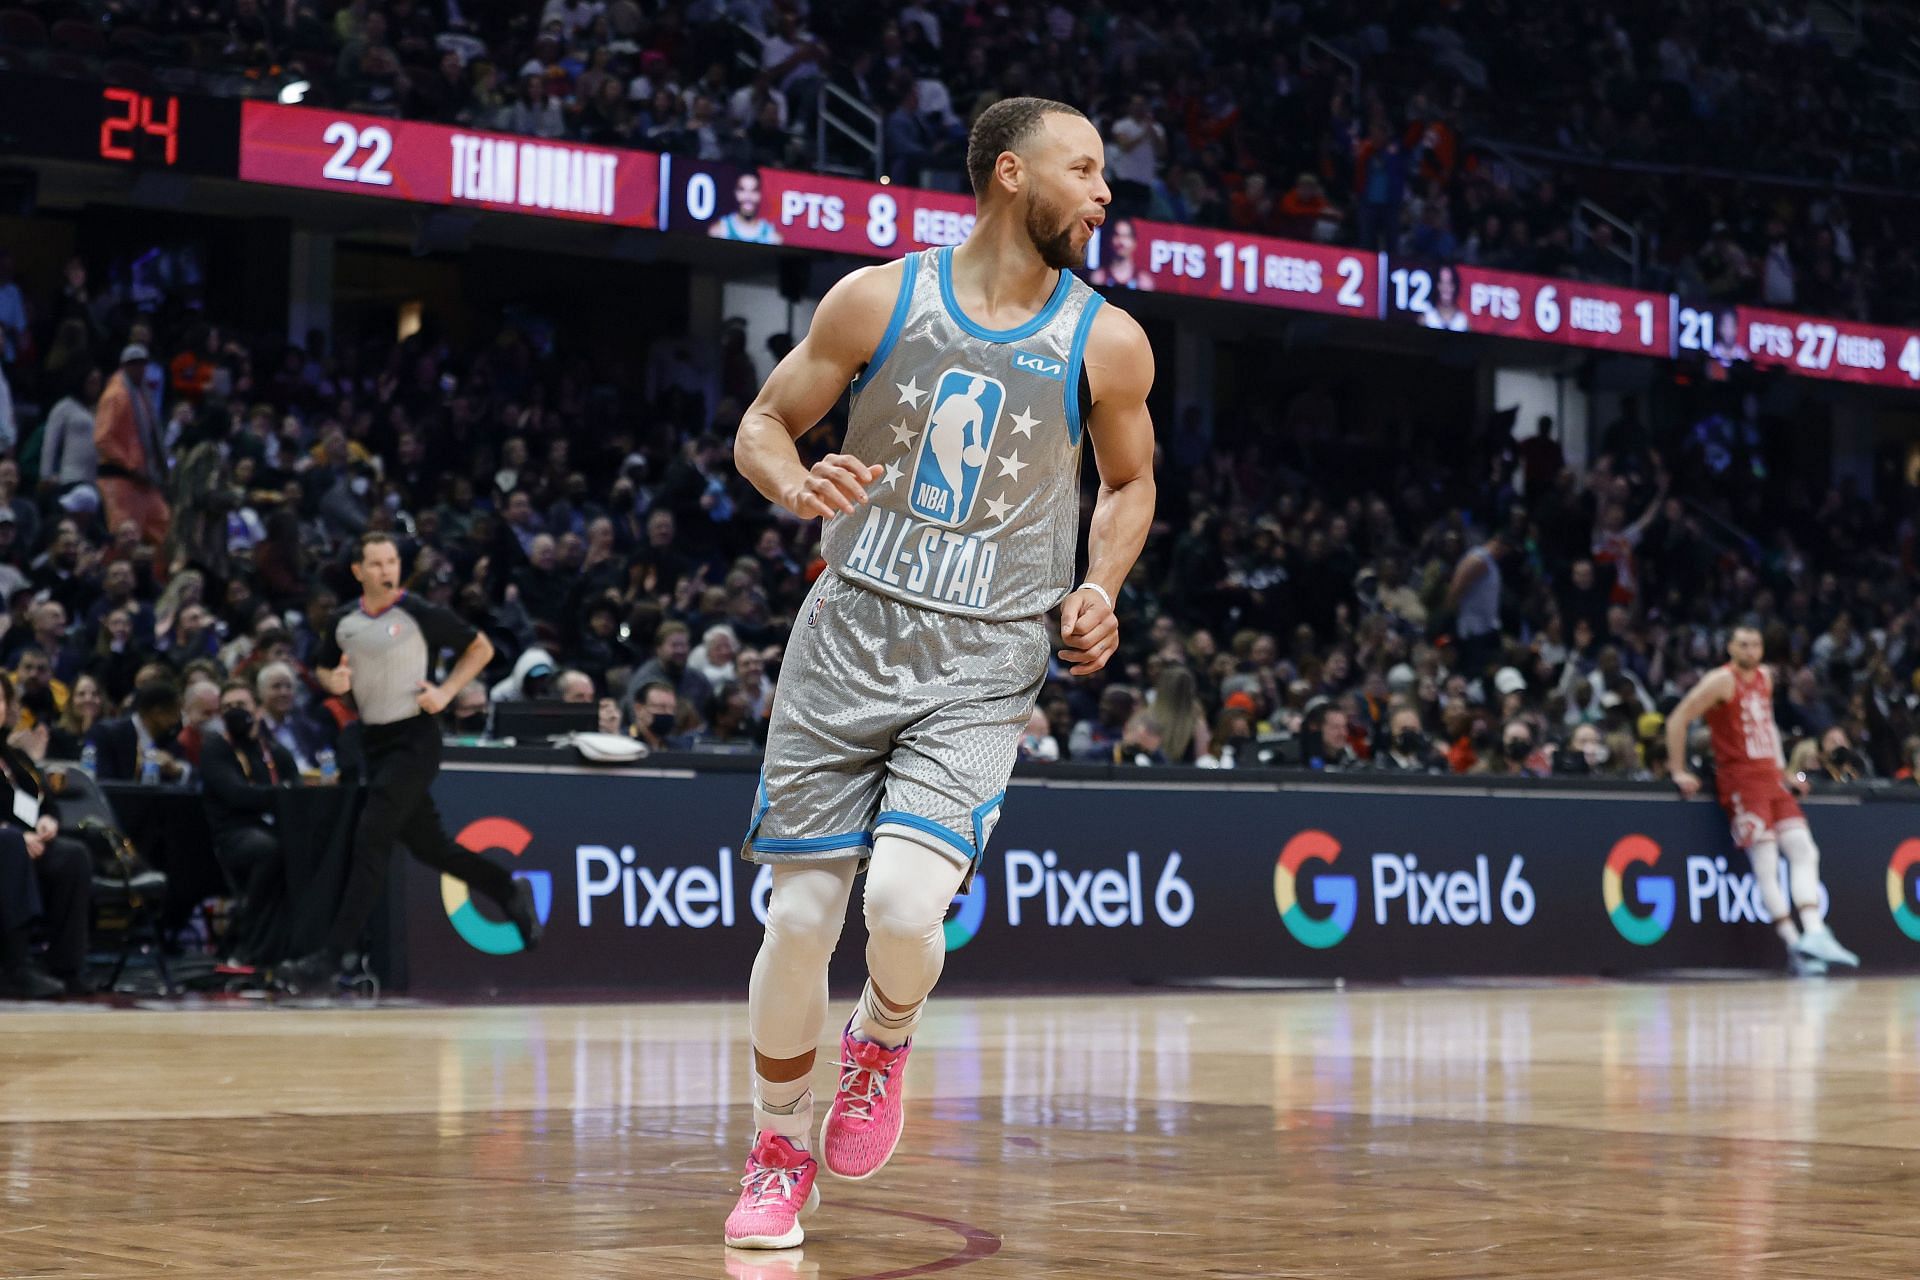 A look into Stephen Curry's three-point shooting legacy by the numbers